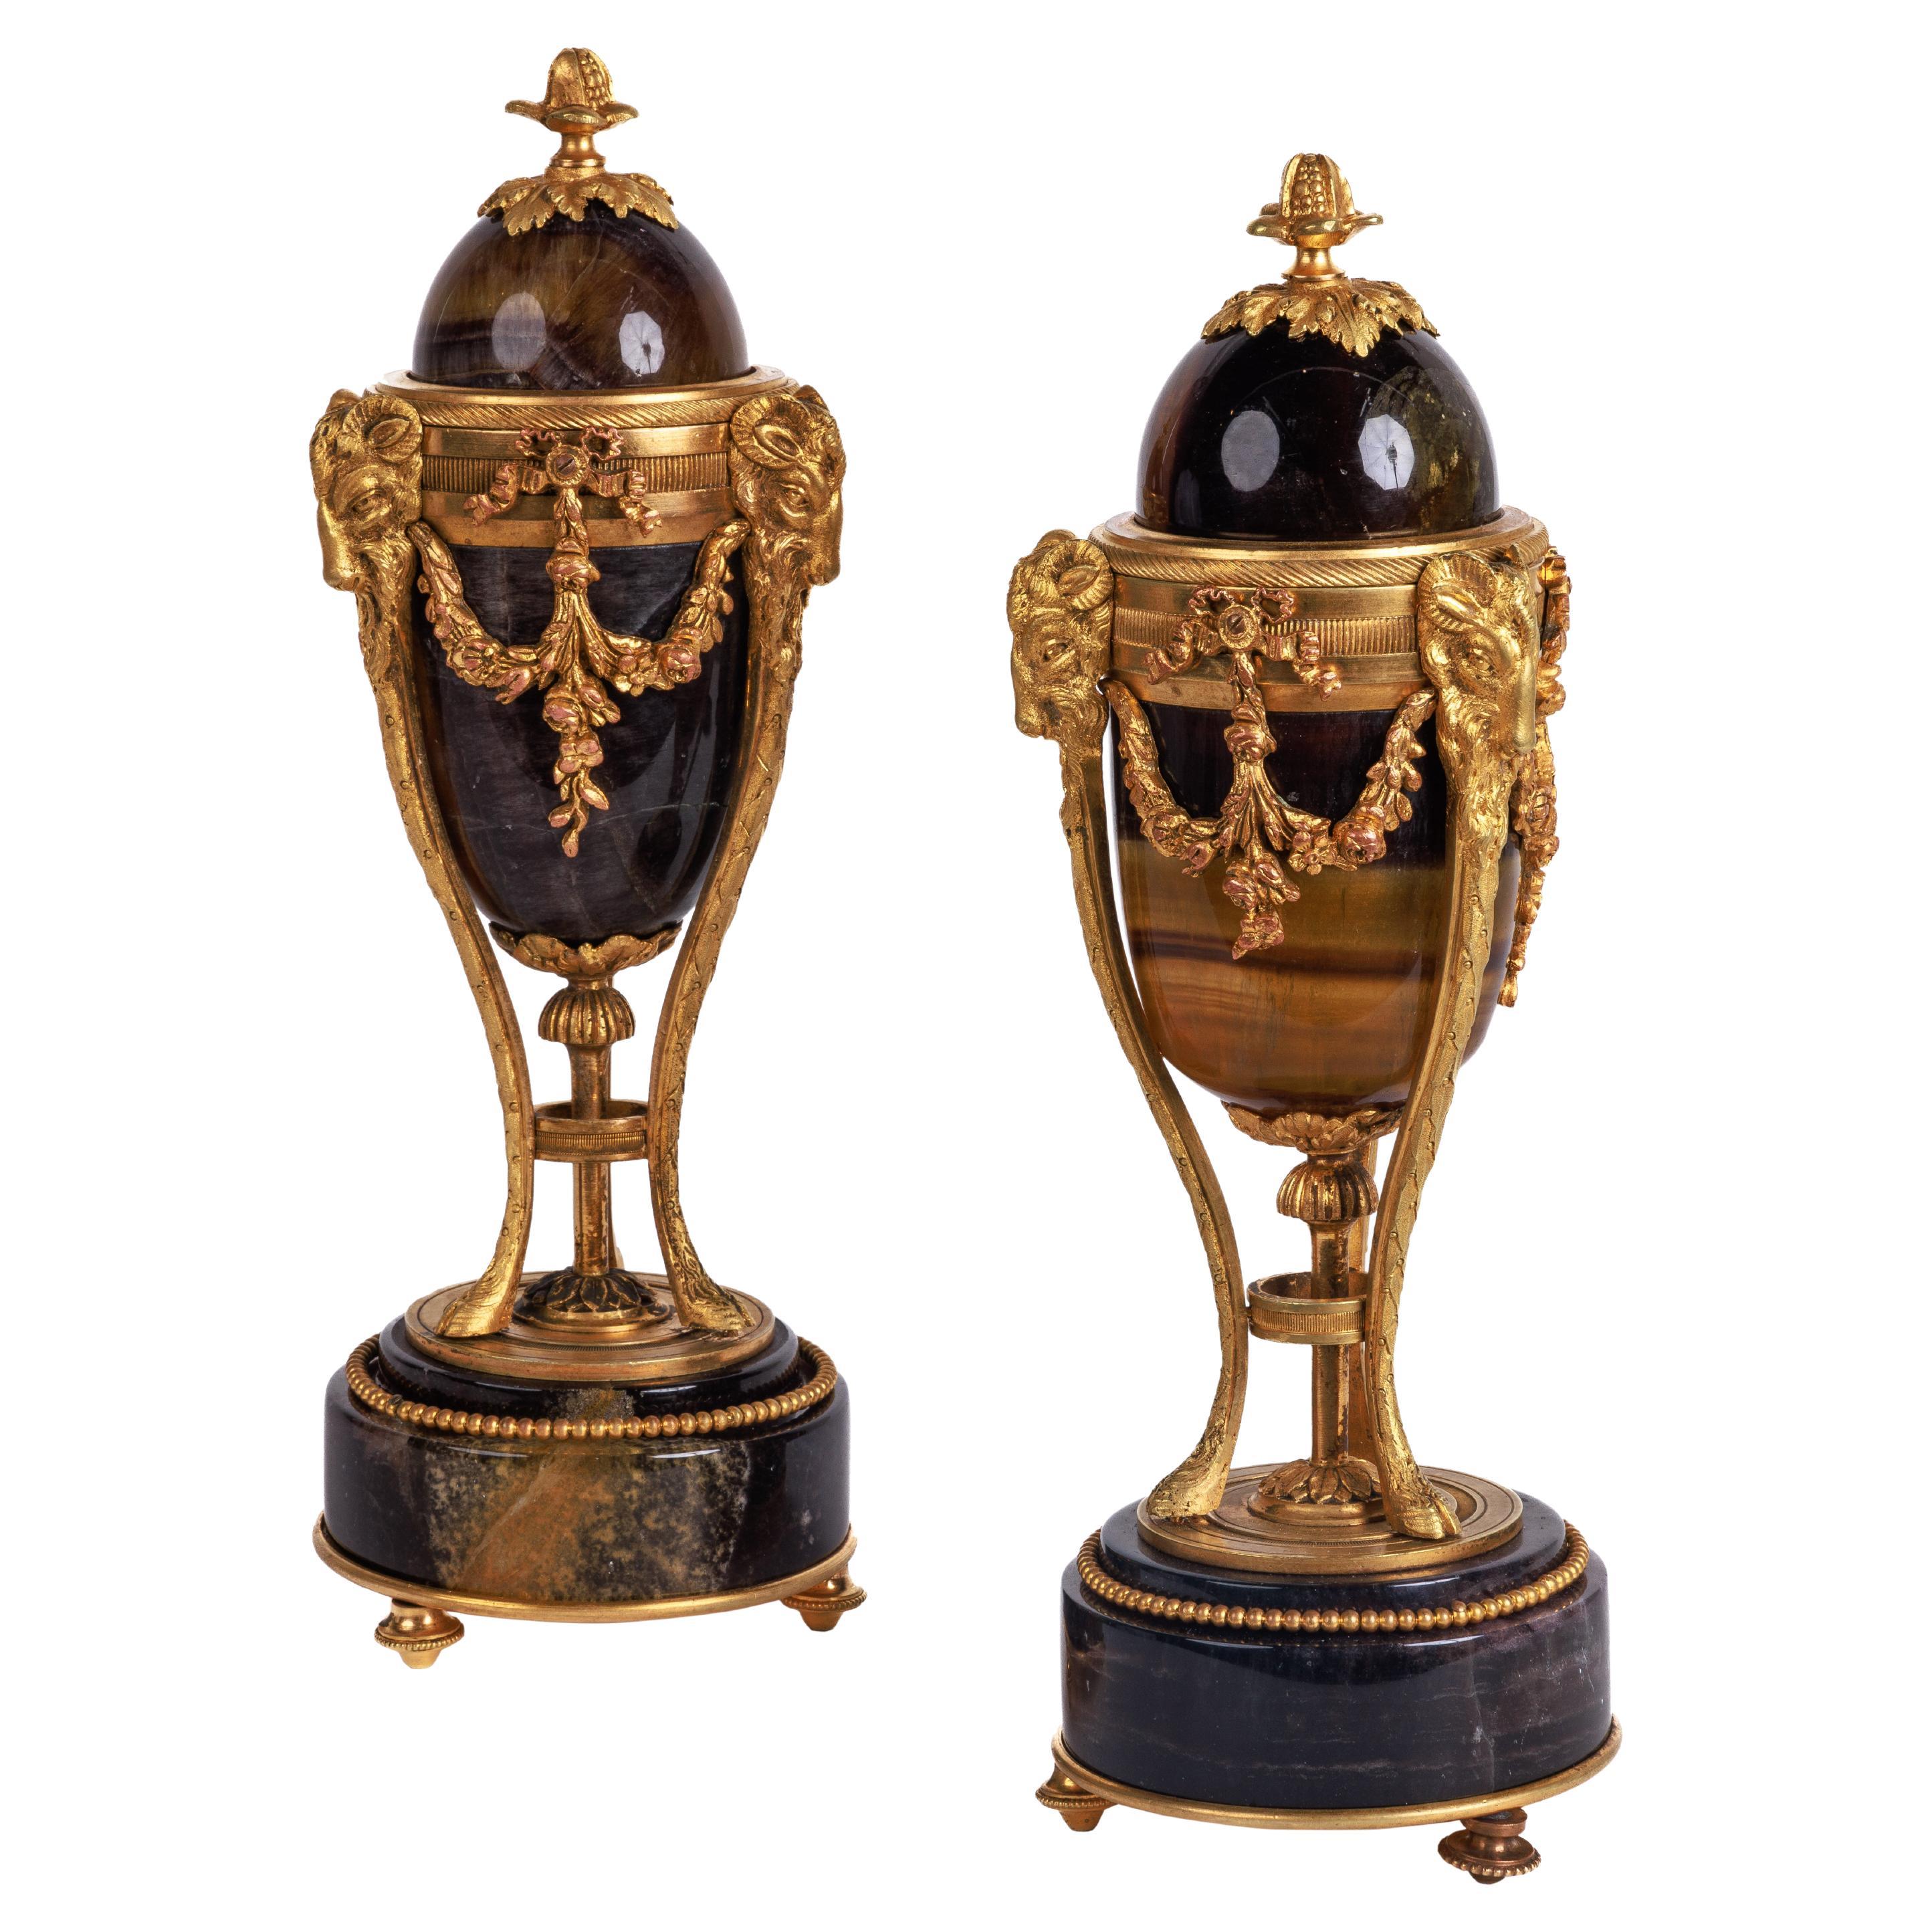 A Rare Pair of French Ormolu-Mounted Blue John Vases Candlesticks, C. 1870 For Sale